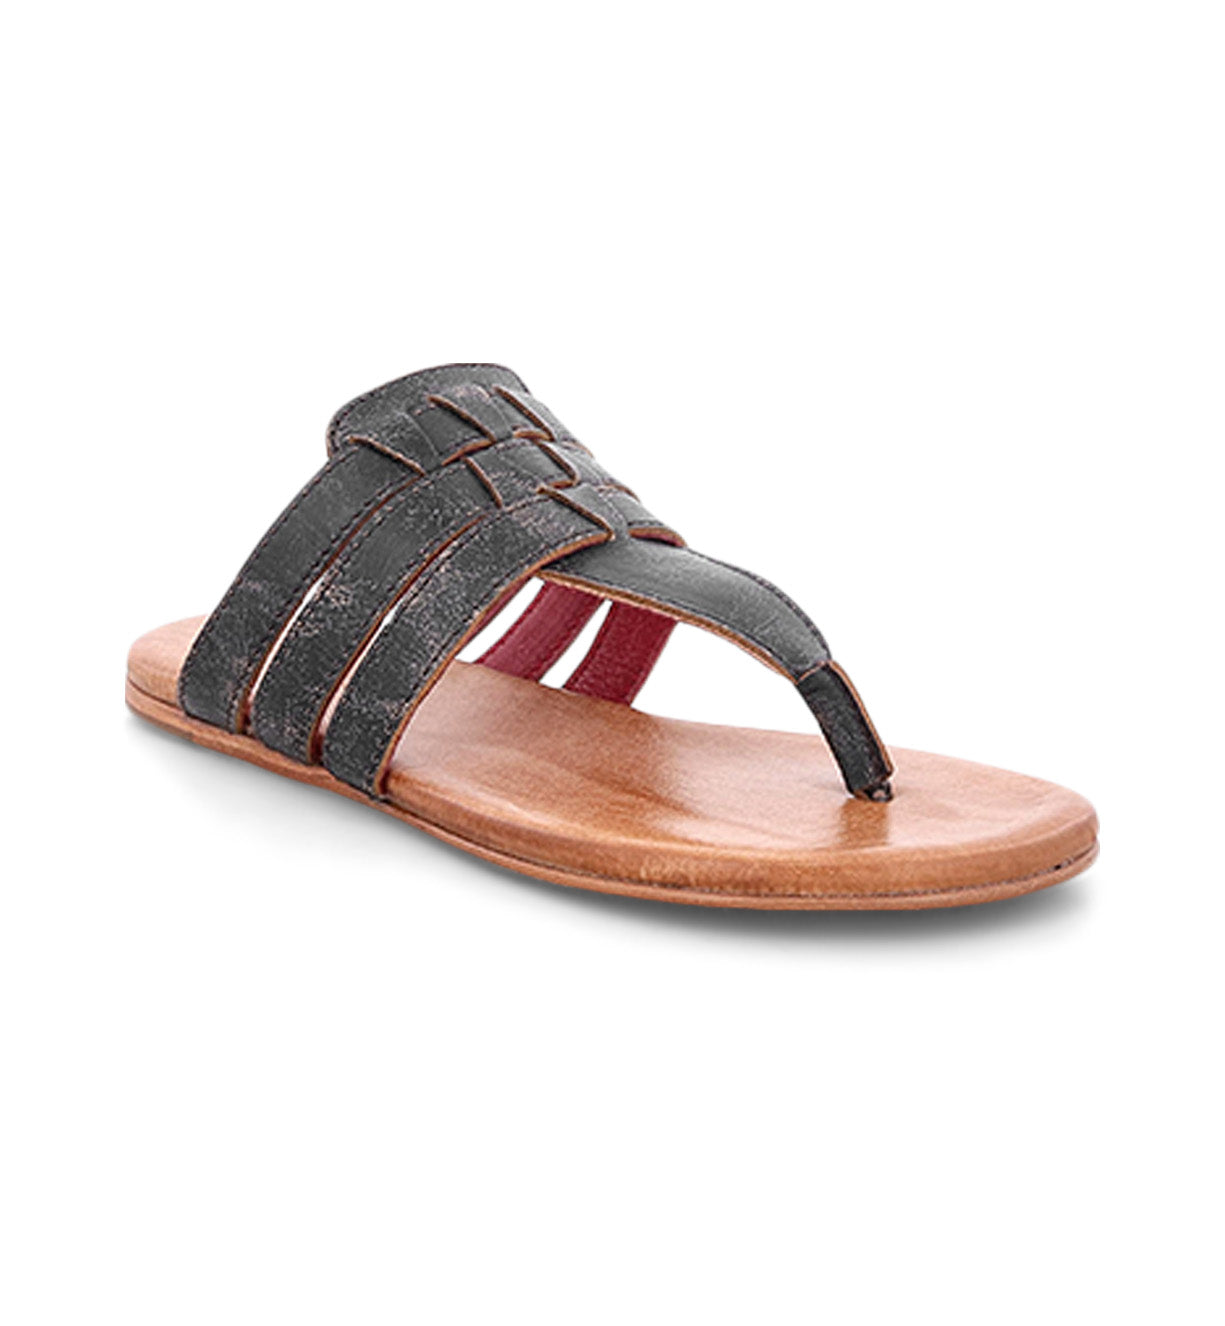 A Yoli women's black leather sandal with straps by Bed Stu.